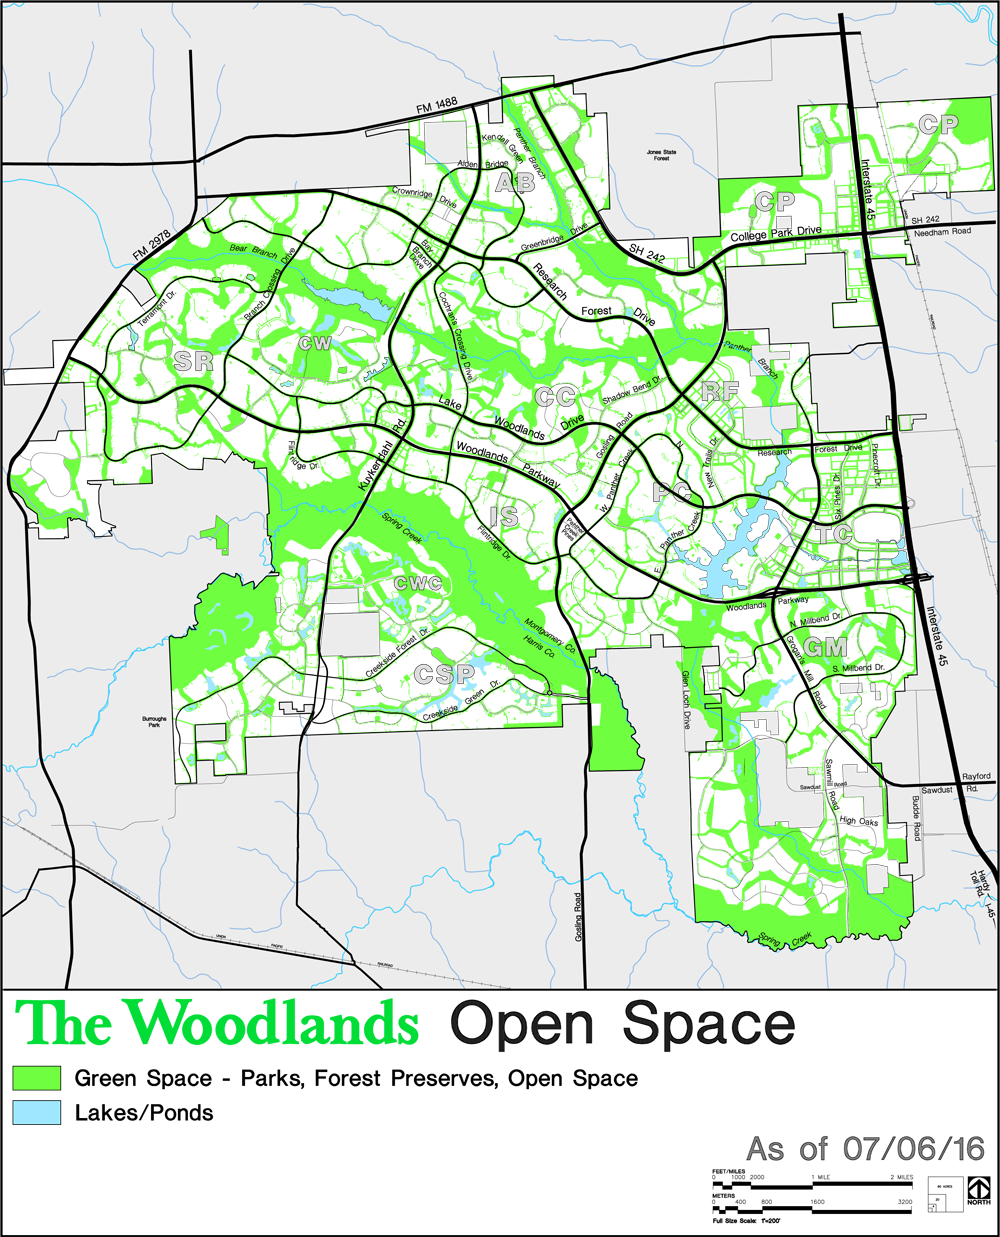 2016 map of The Woodlands showing open space such as green space, lakes, and ponds